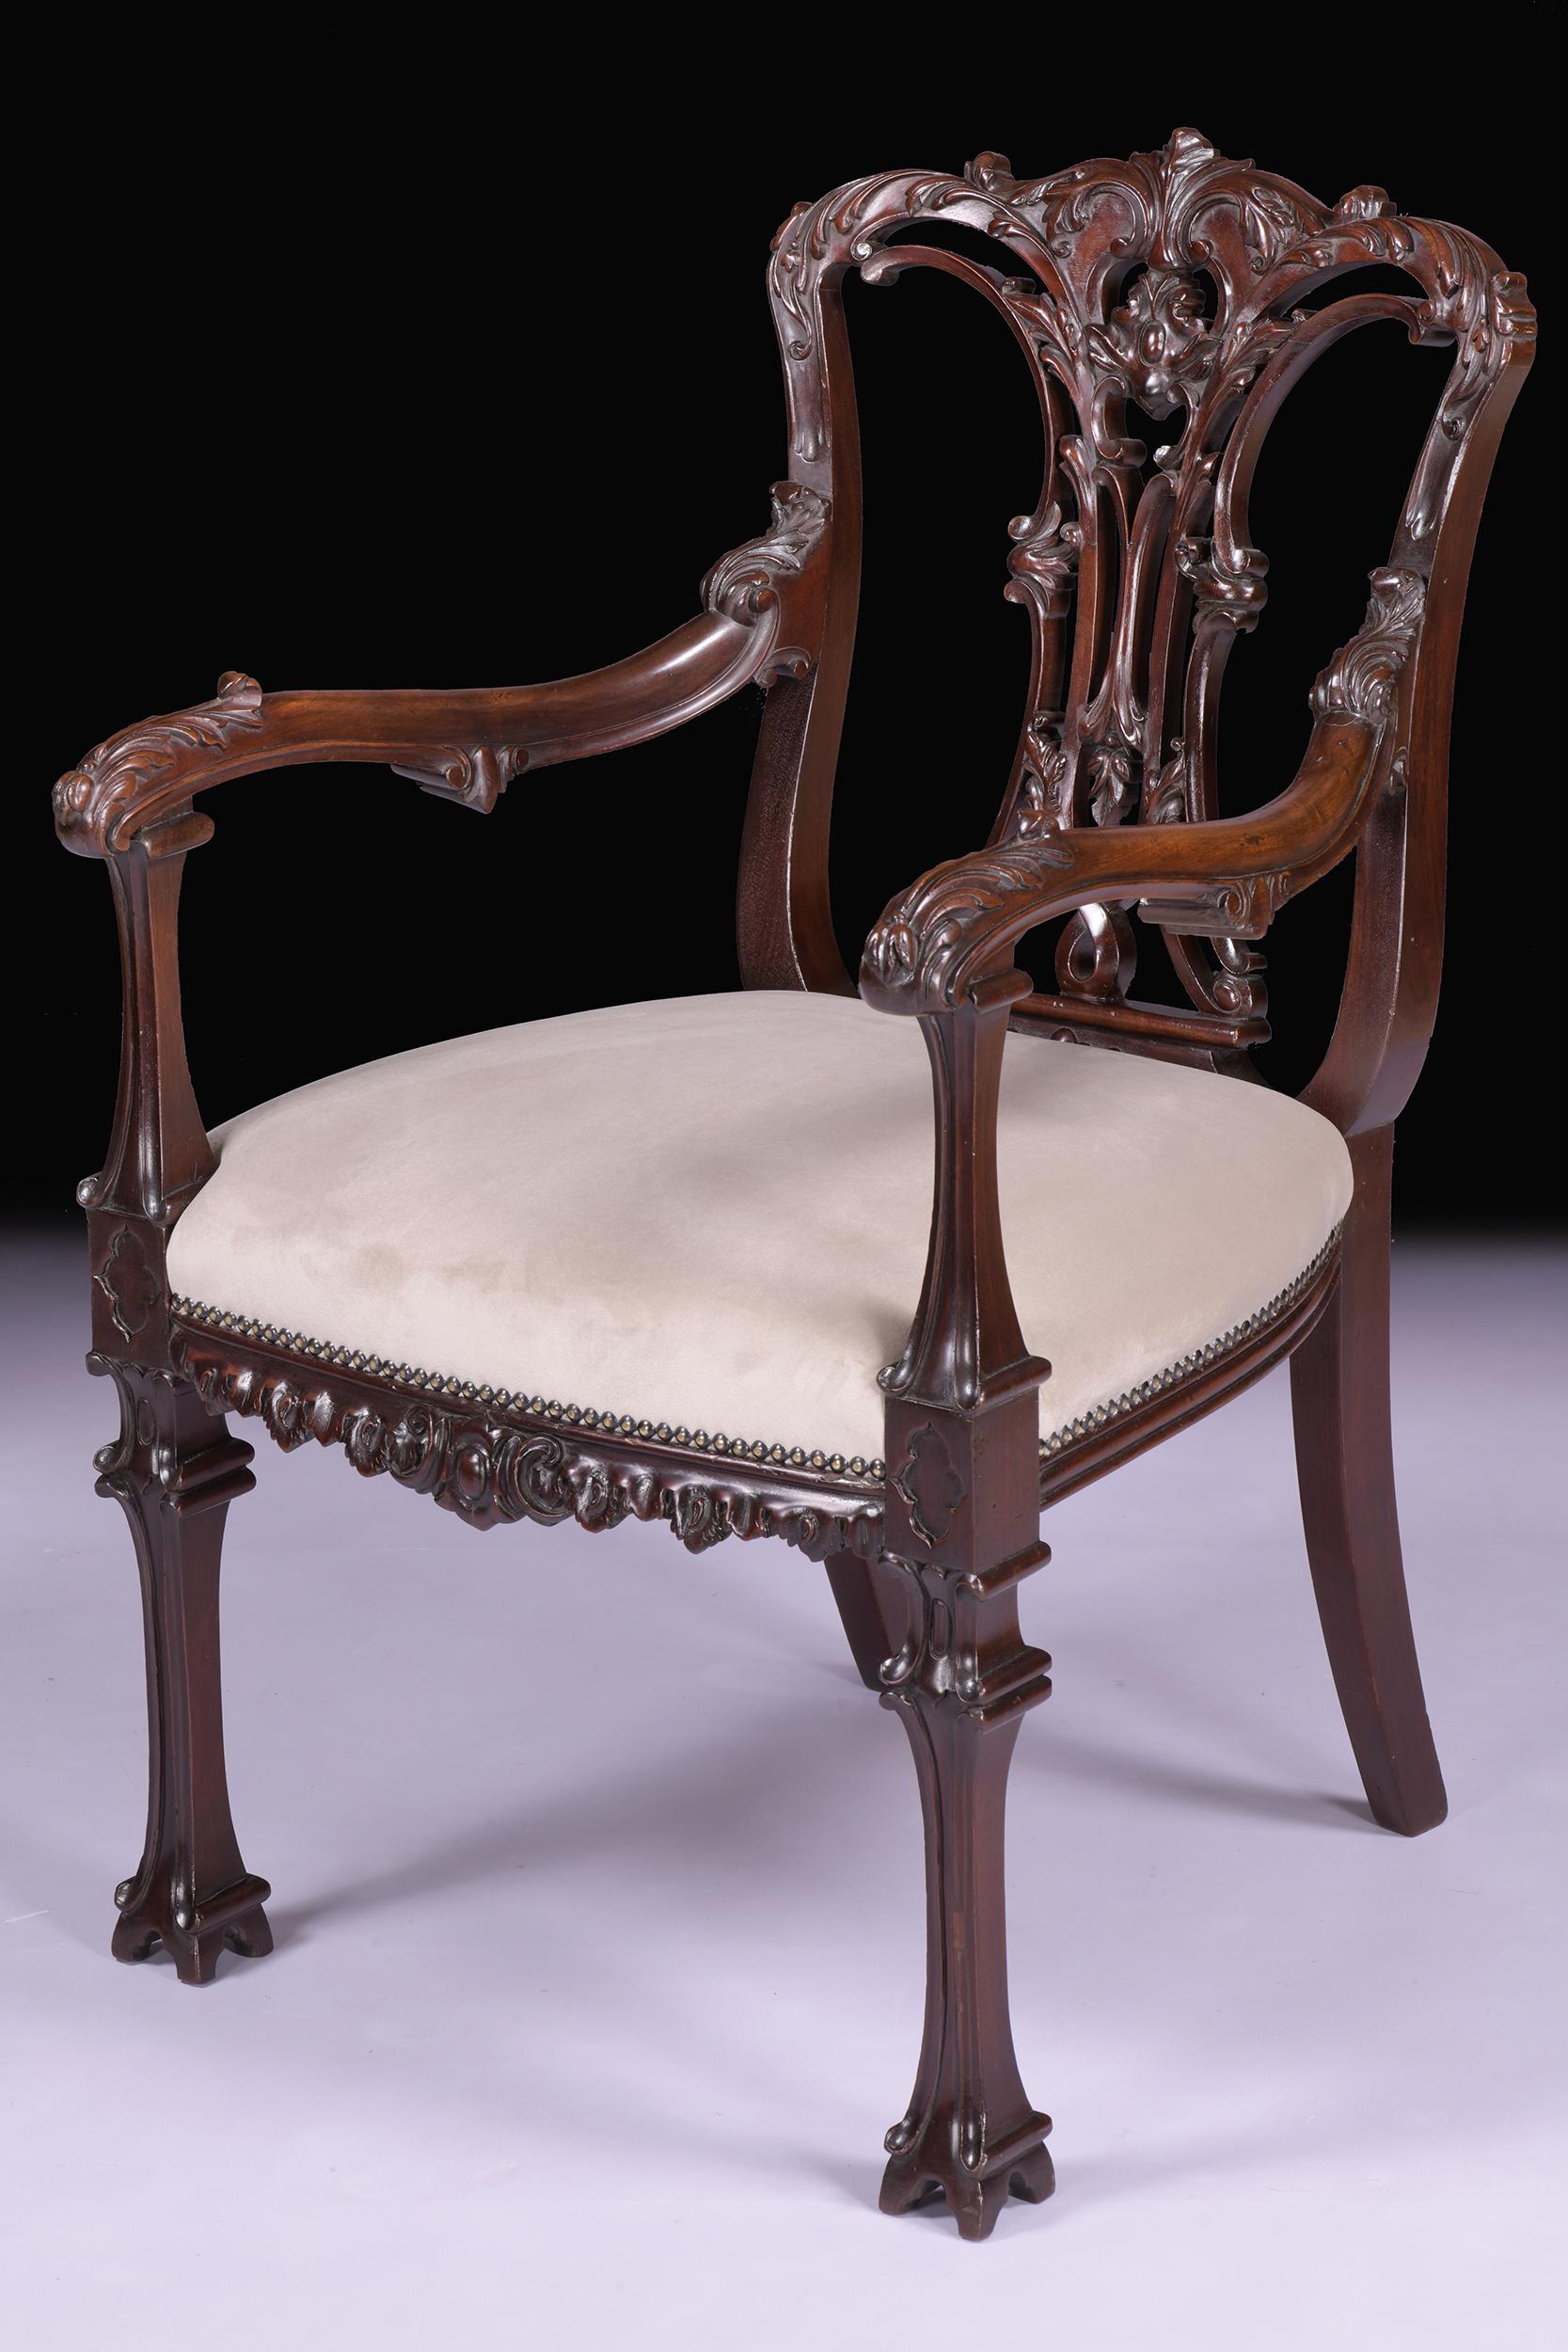 Fabric Pair Of 19th Century Armchairs In The Chinese Chippendale Style